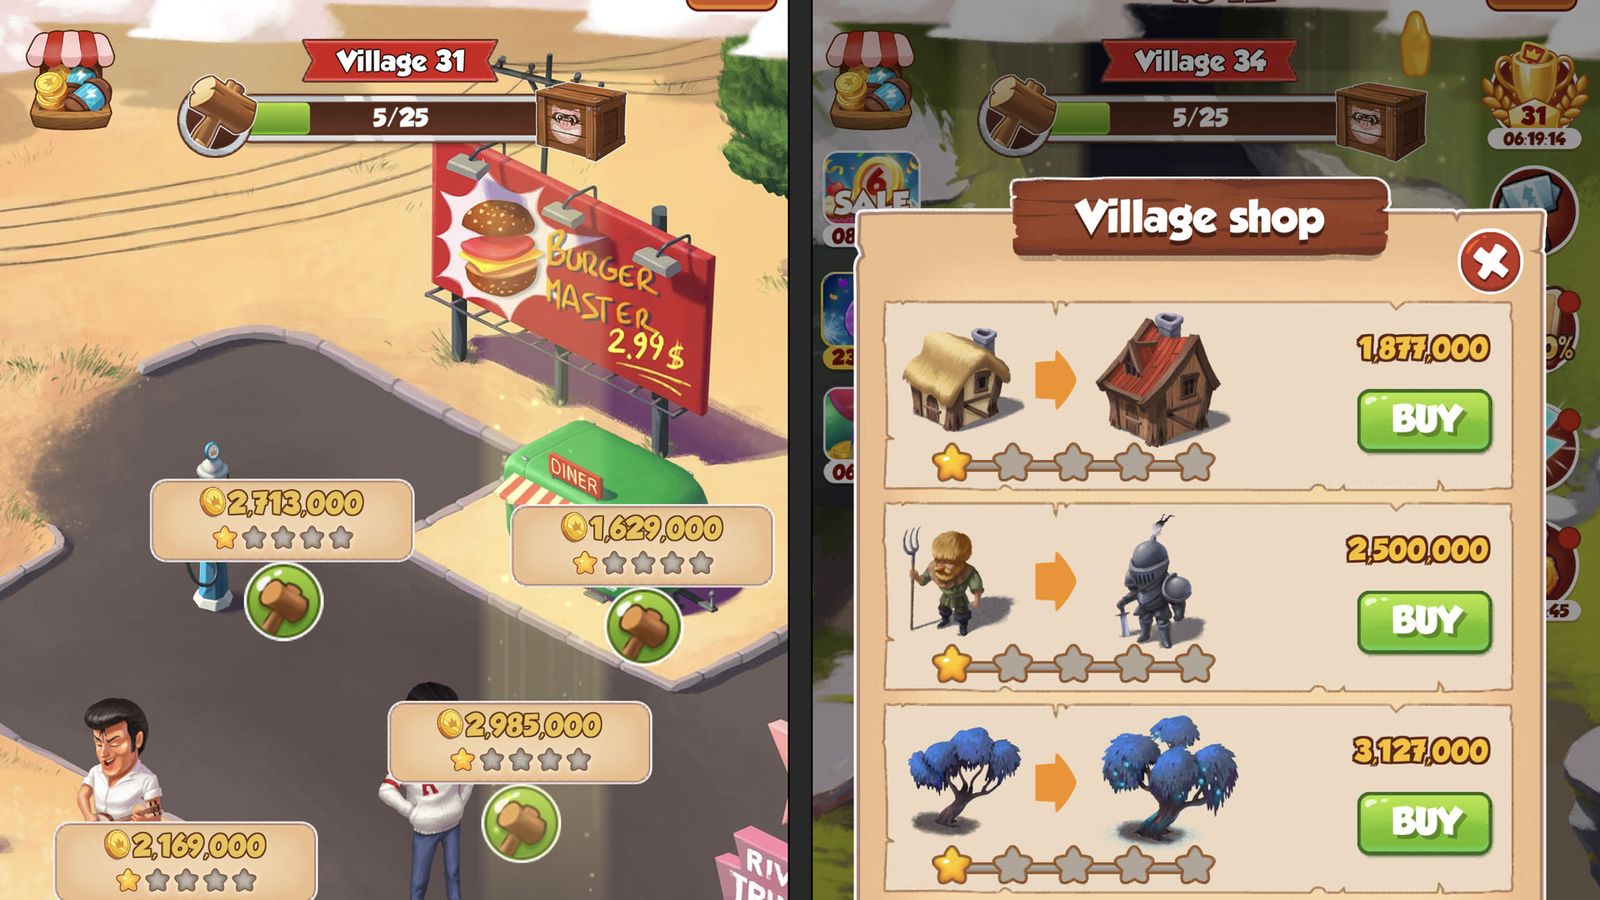 You can upgrade your Coin Master village in a number of ways.